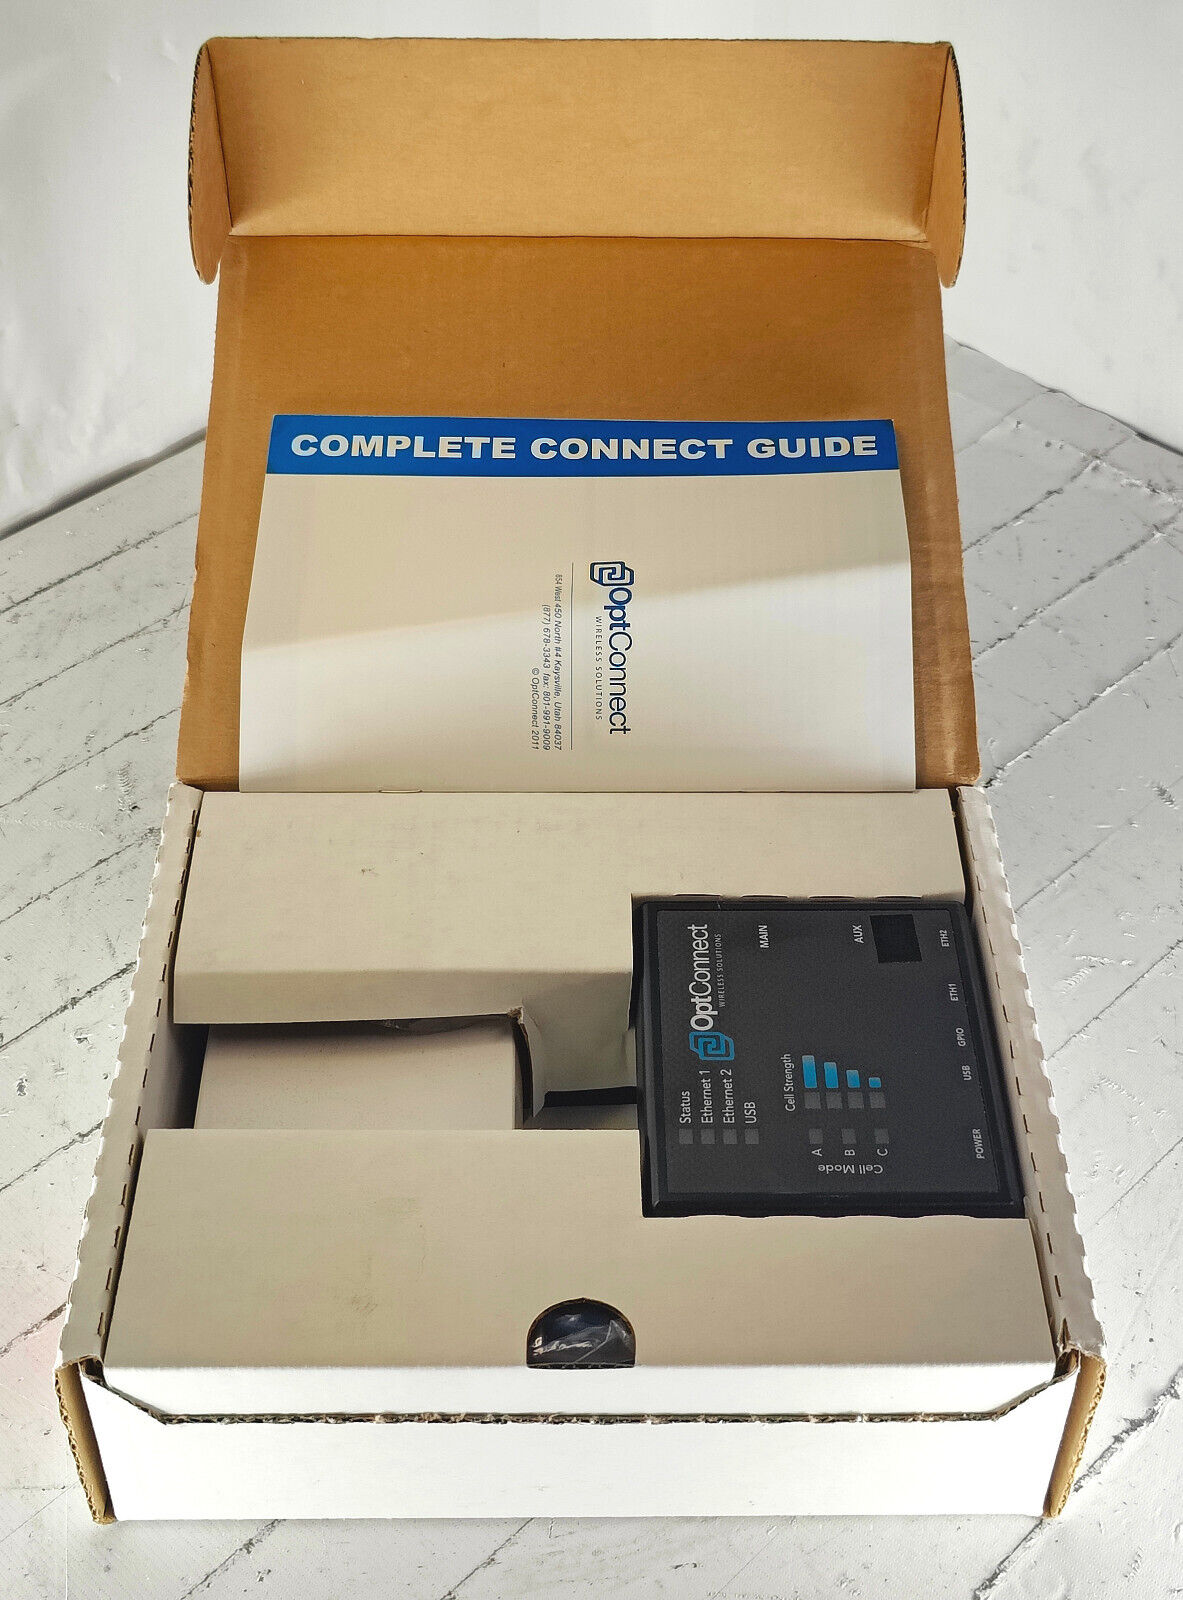 OptConnect Wireless Solutions OC-4500 Wireless 4G Modem Router 65-800948 w/ Accs